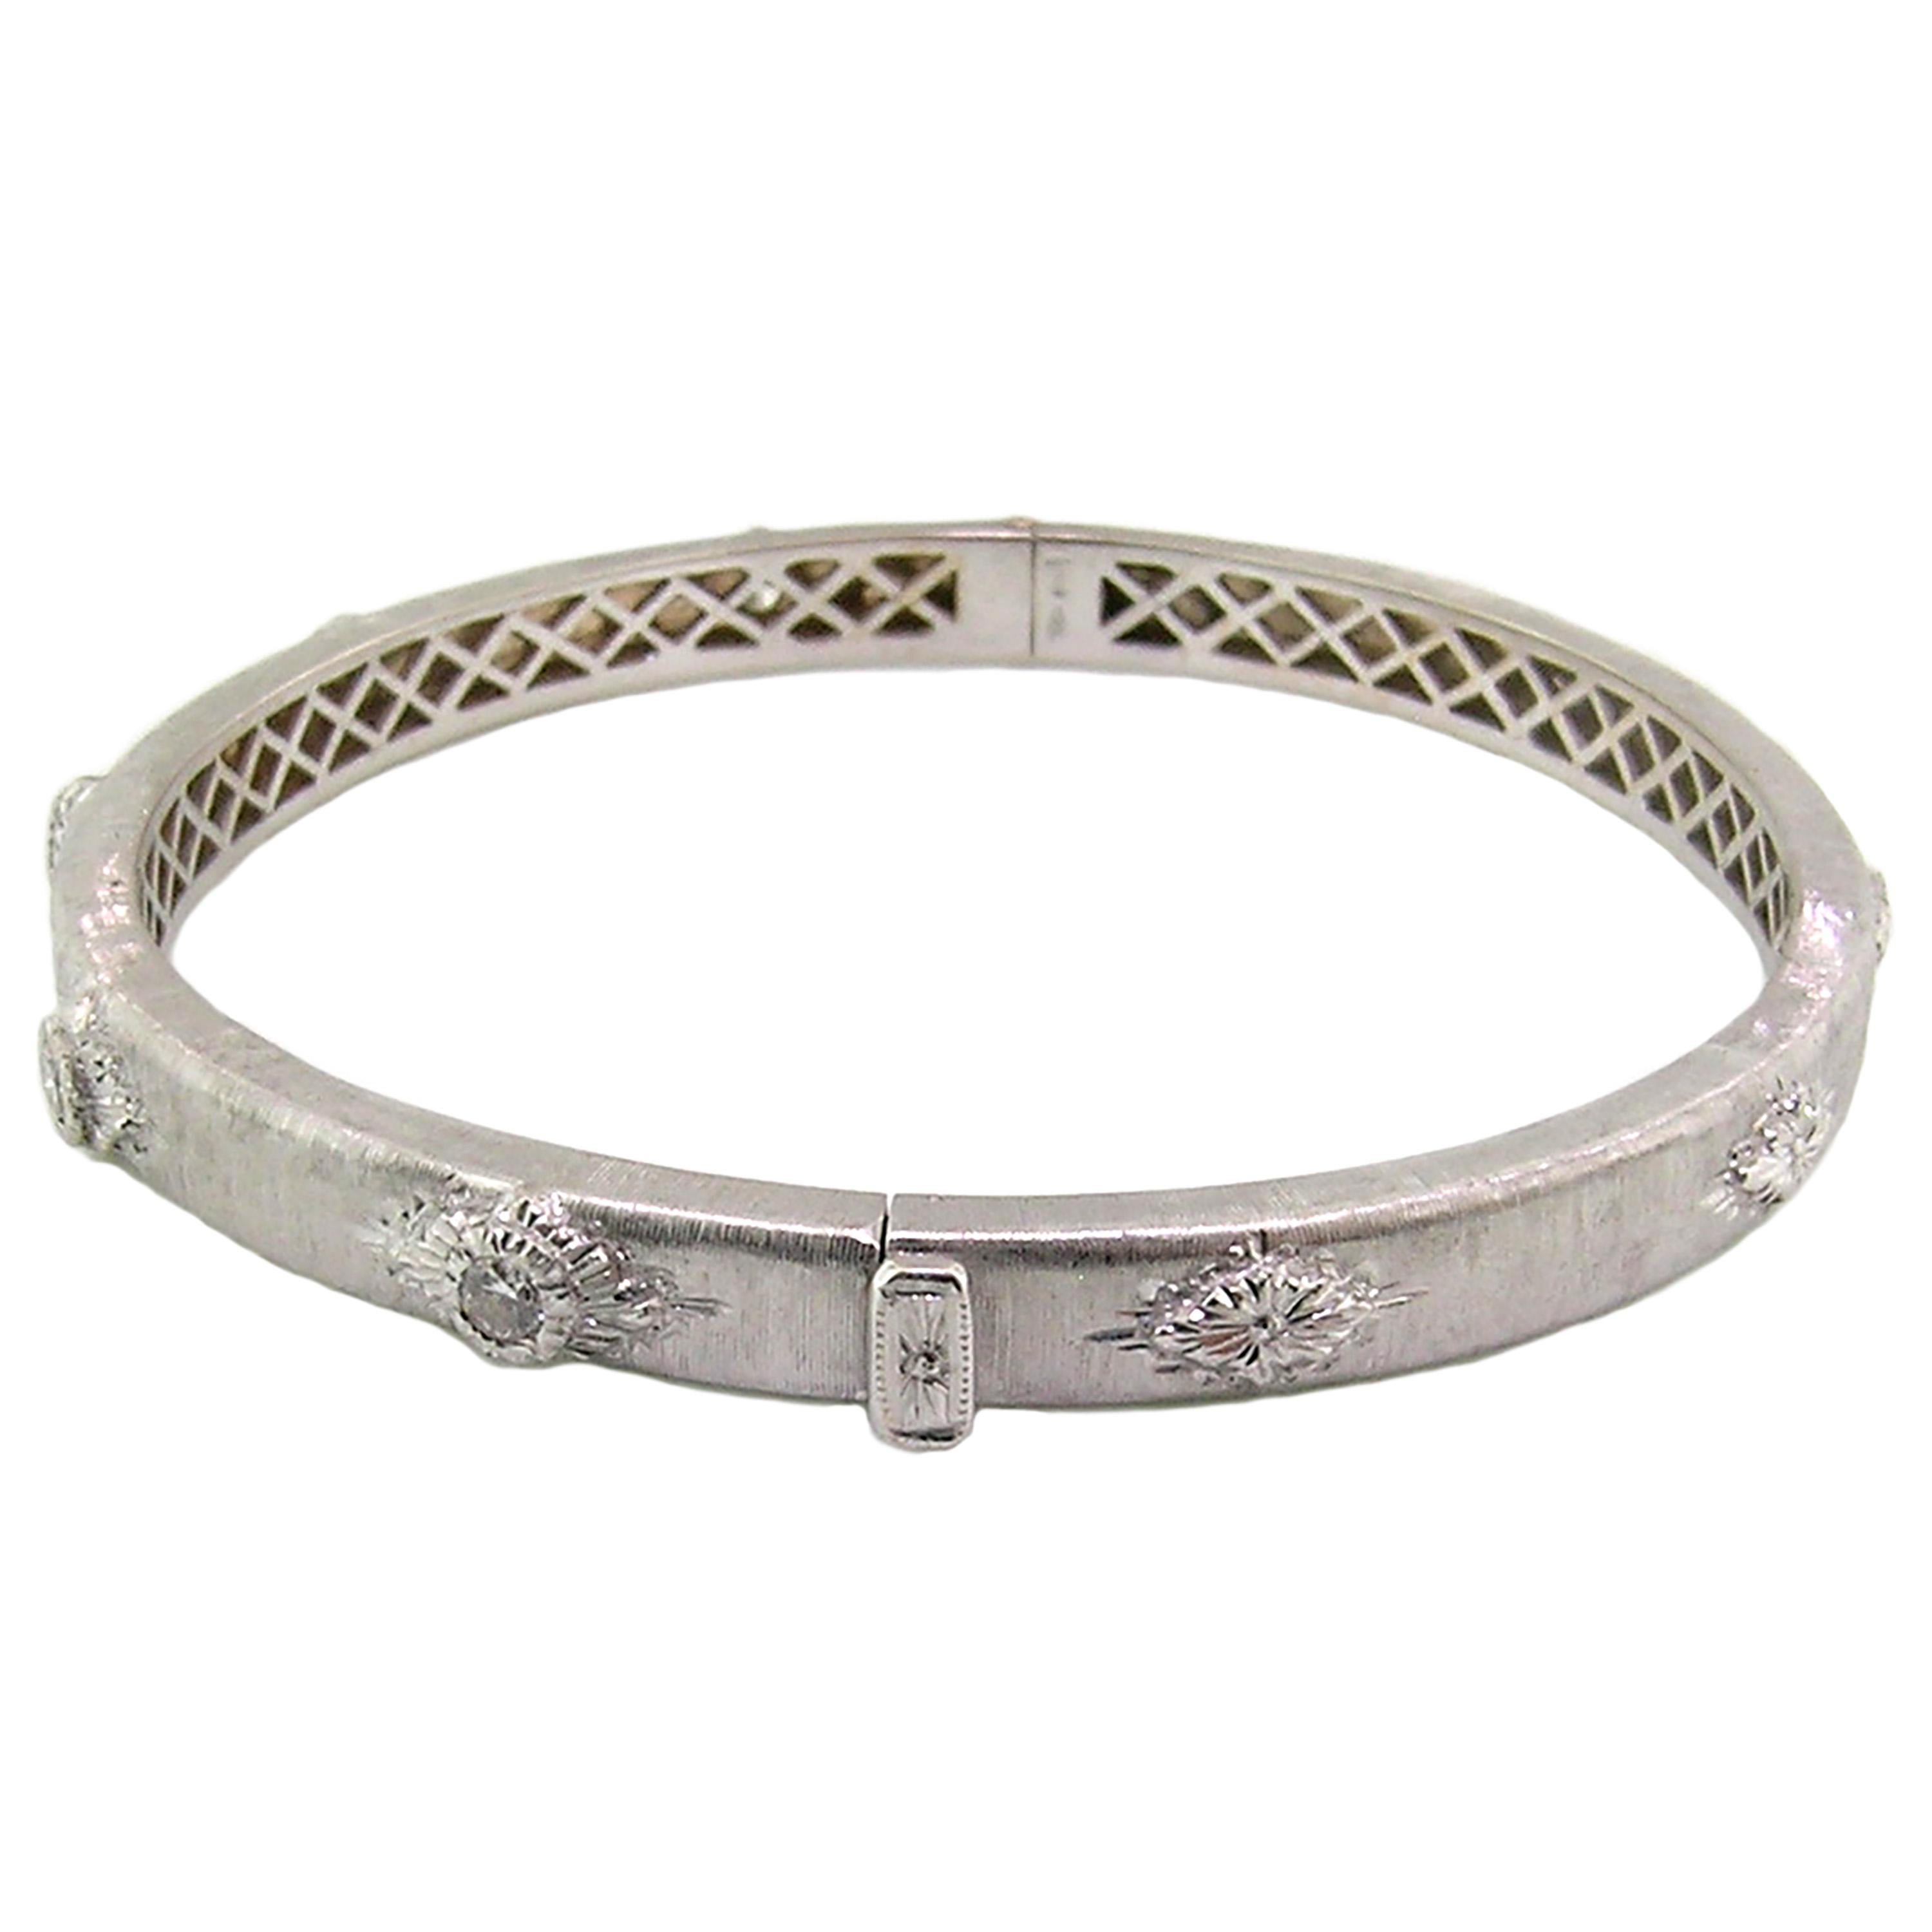 Round Cut 18 Karat Diamond Bangle in White, Handmade and Hand Engraved in Florence, Italy